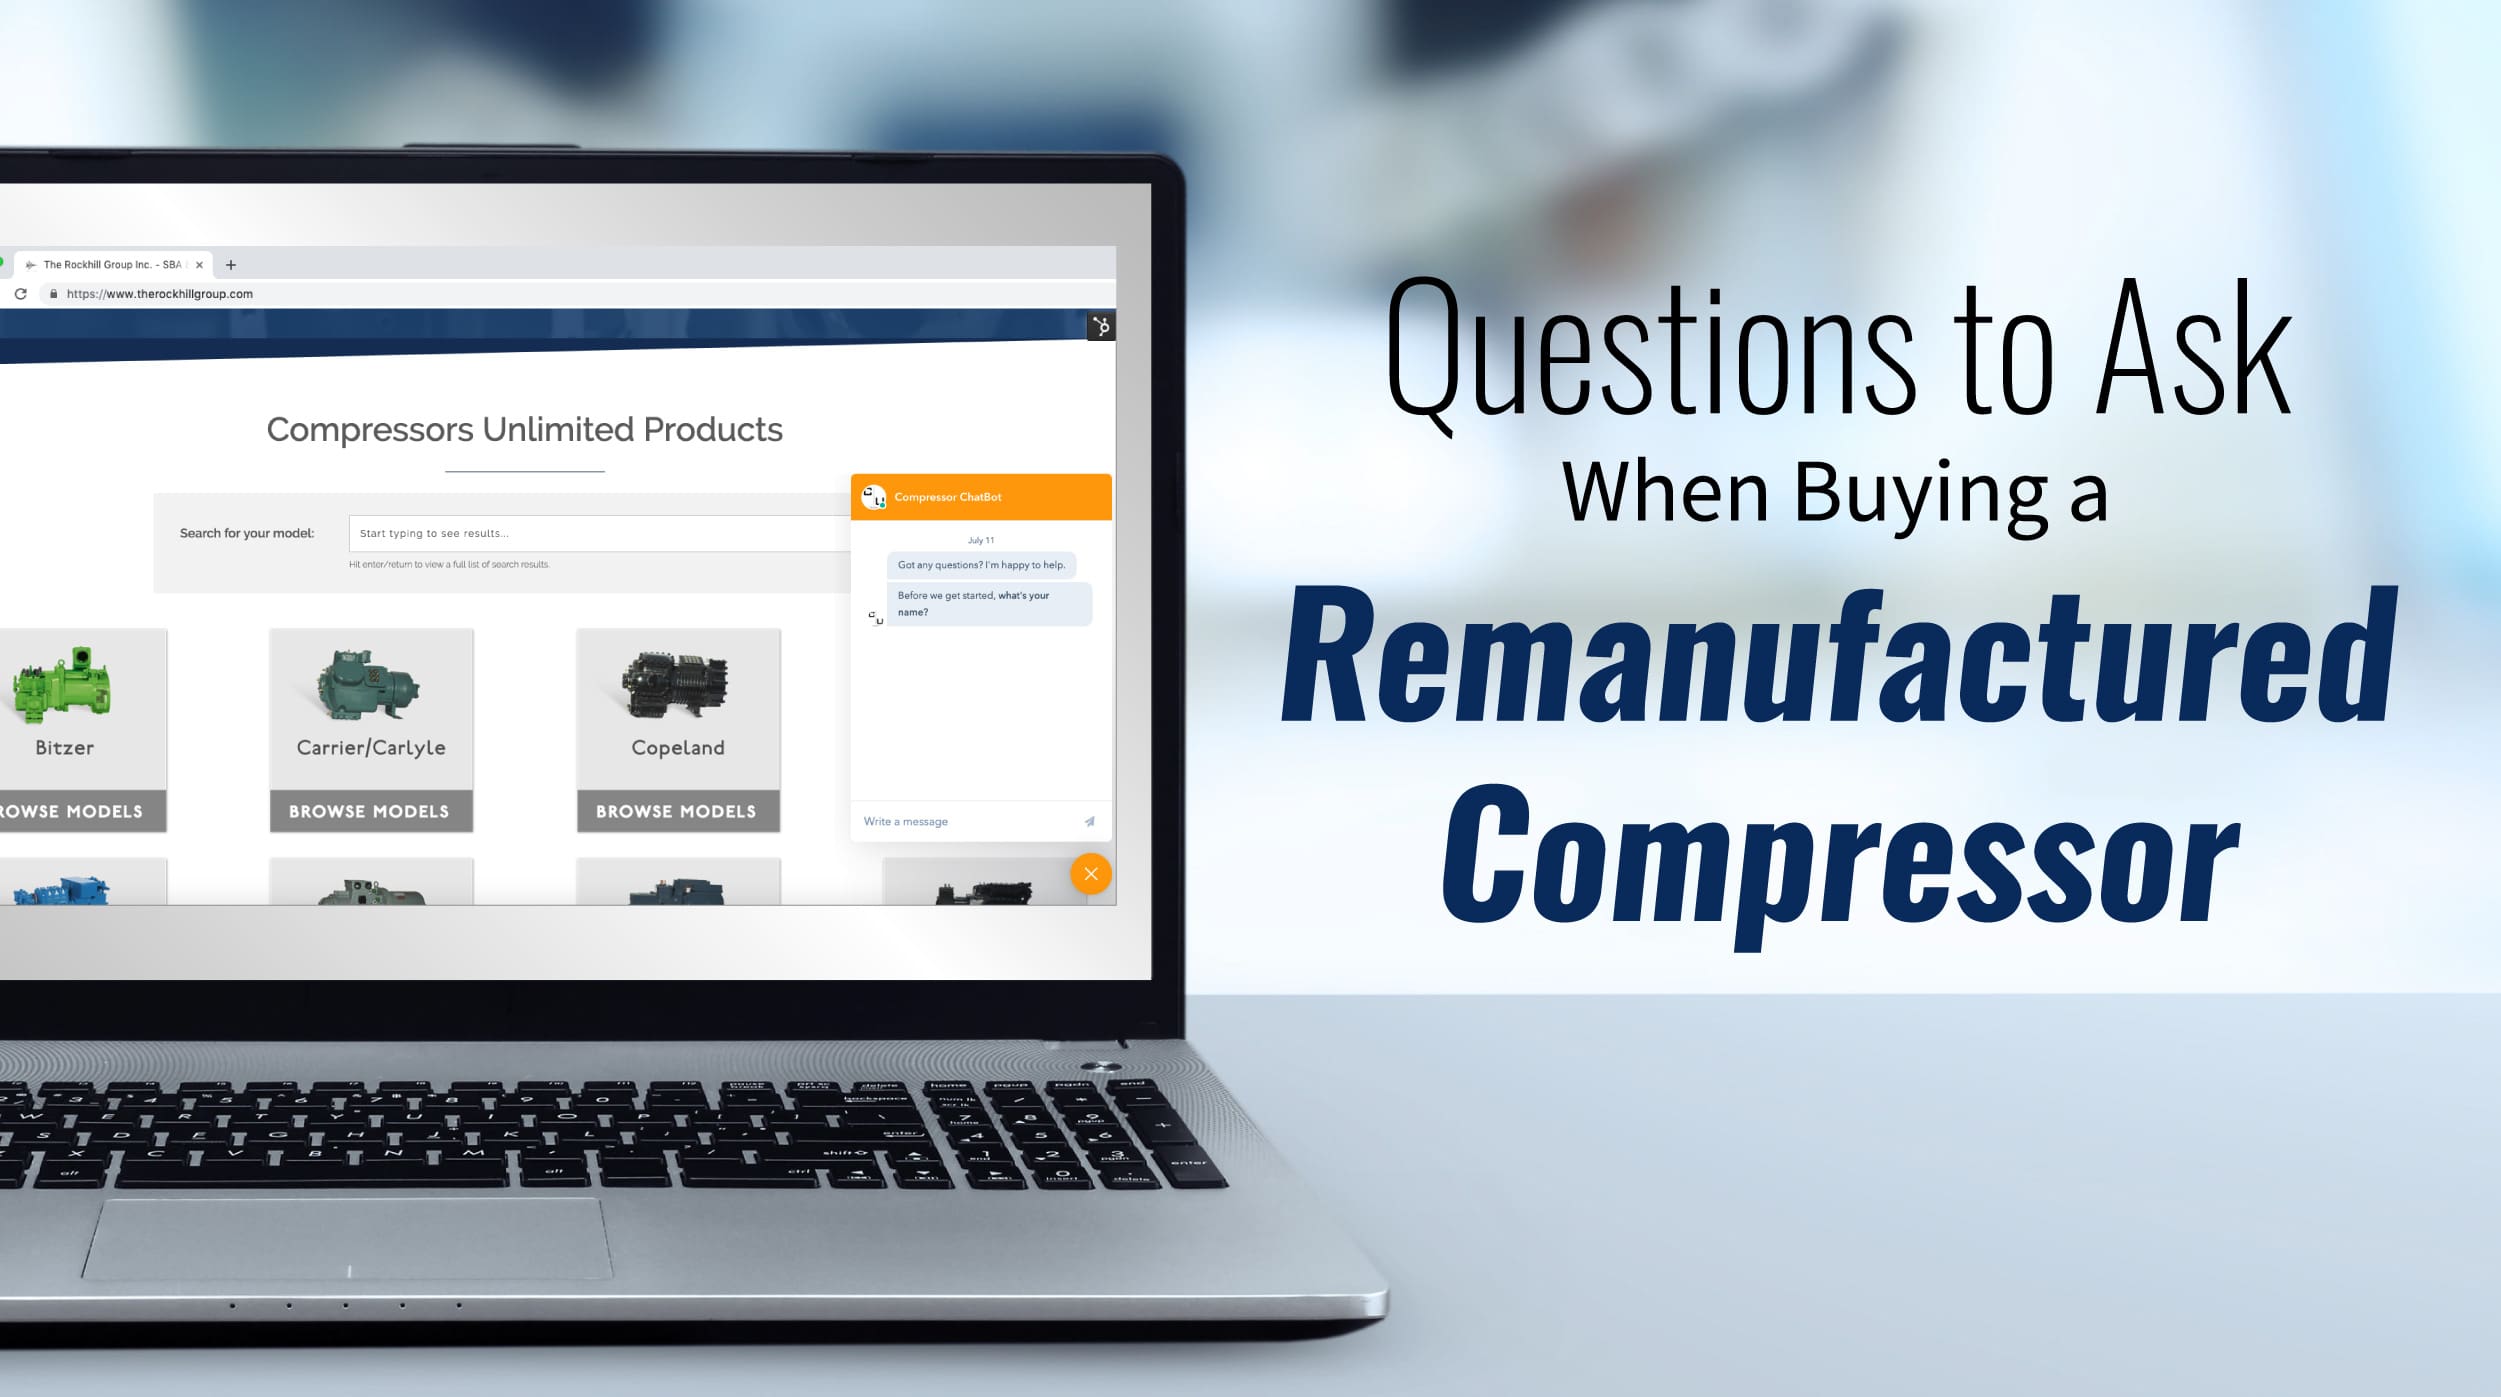 Questions to Ask When Buying Remanufactured Compressors